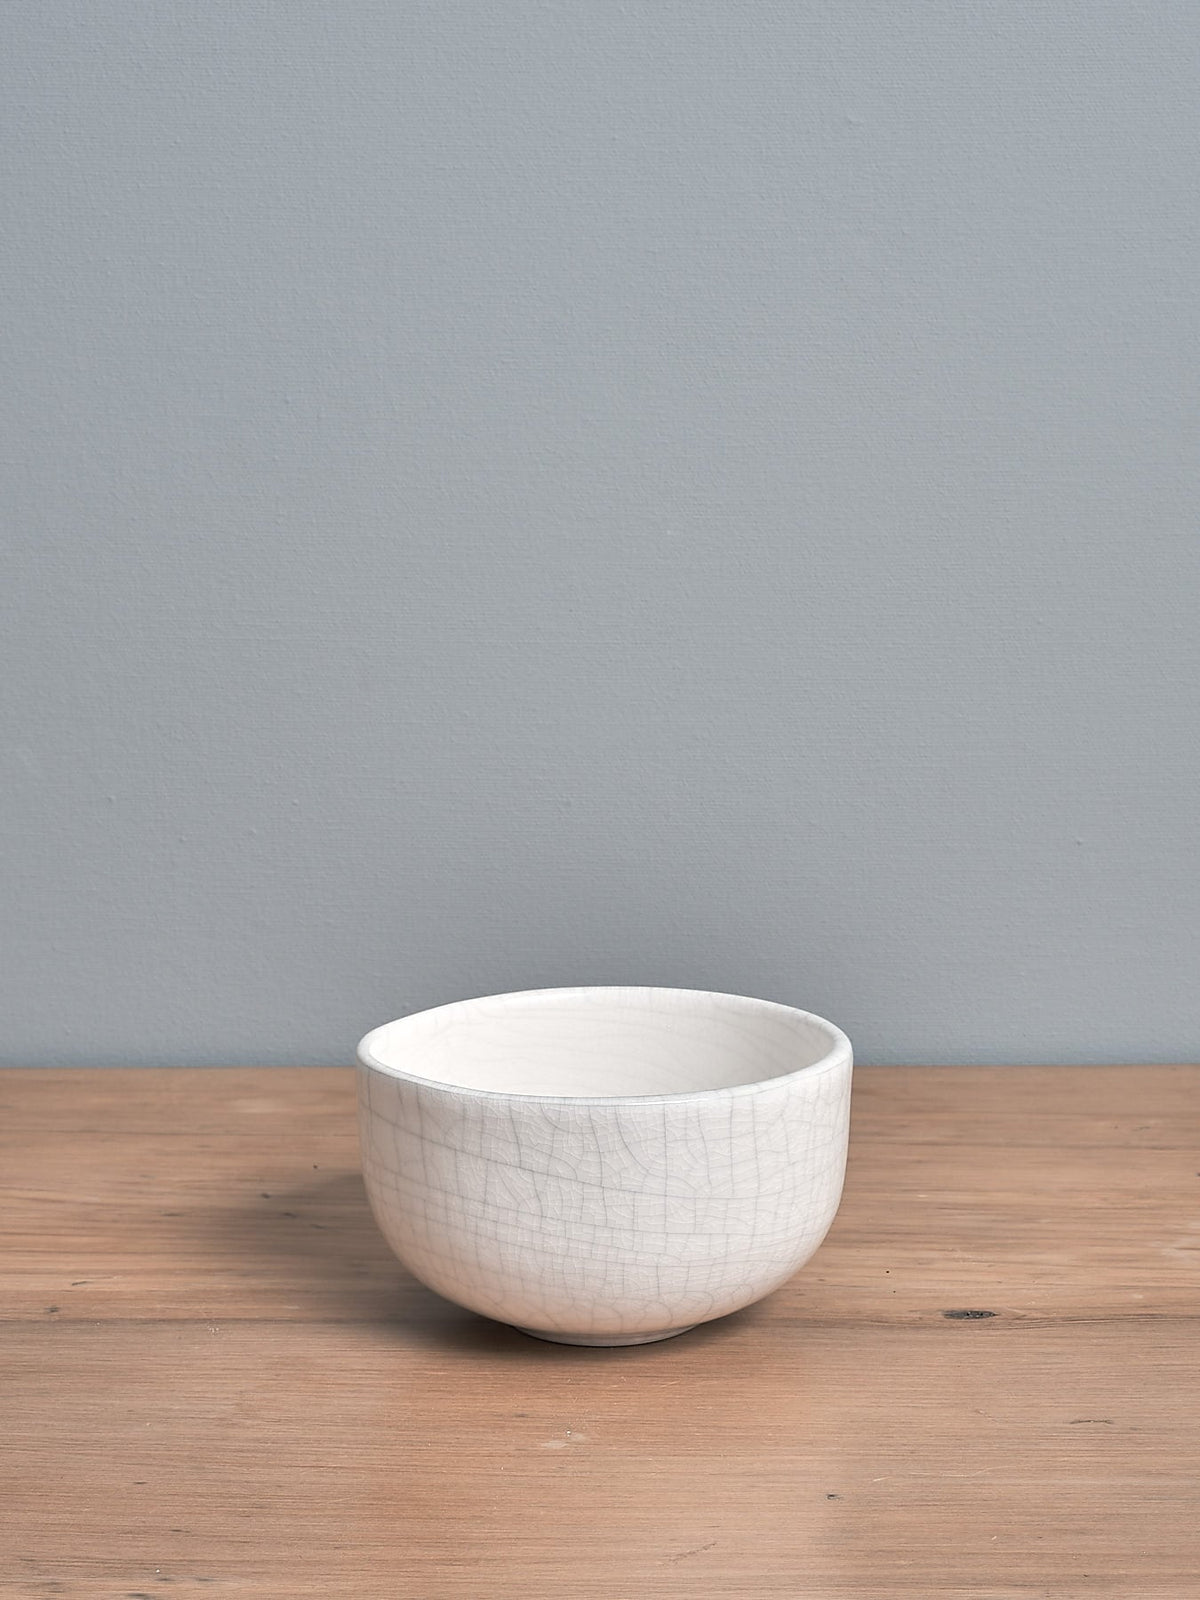 An Olive Bowl – Bone Crackle by Gidon Bing sitting on top of a wooden table.